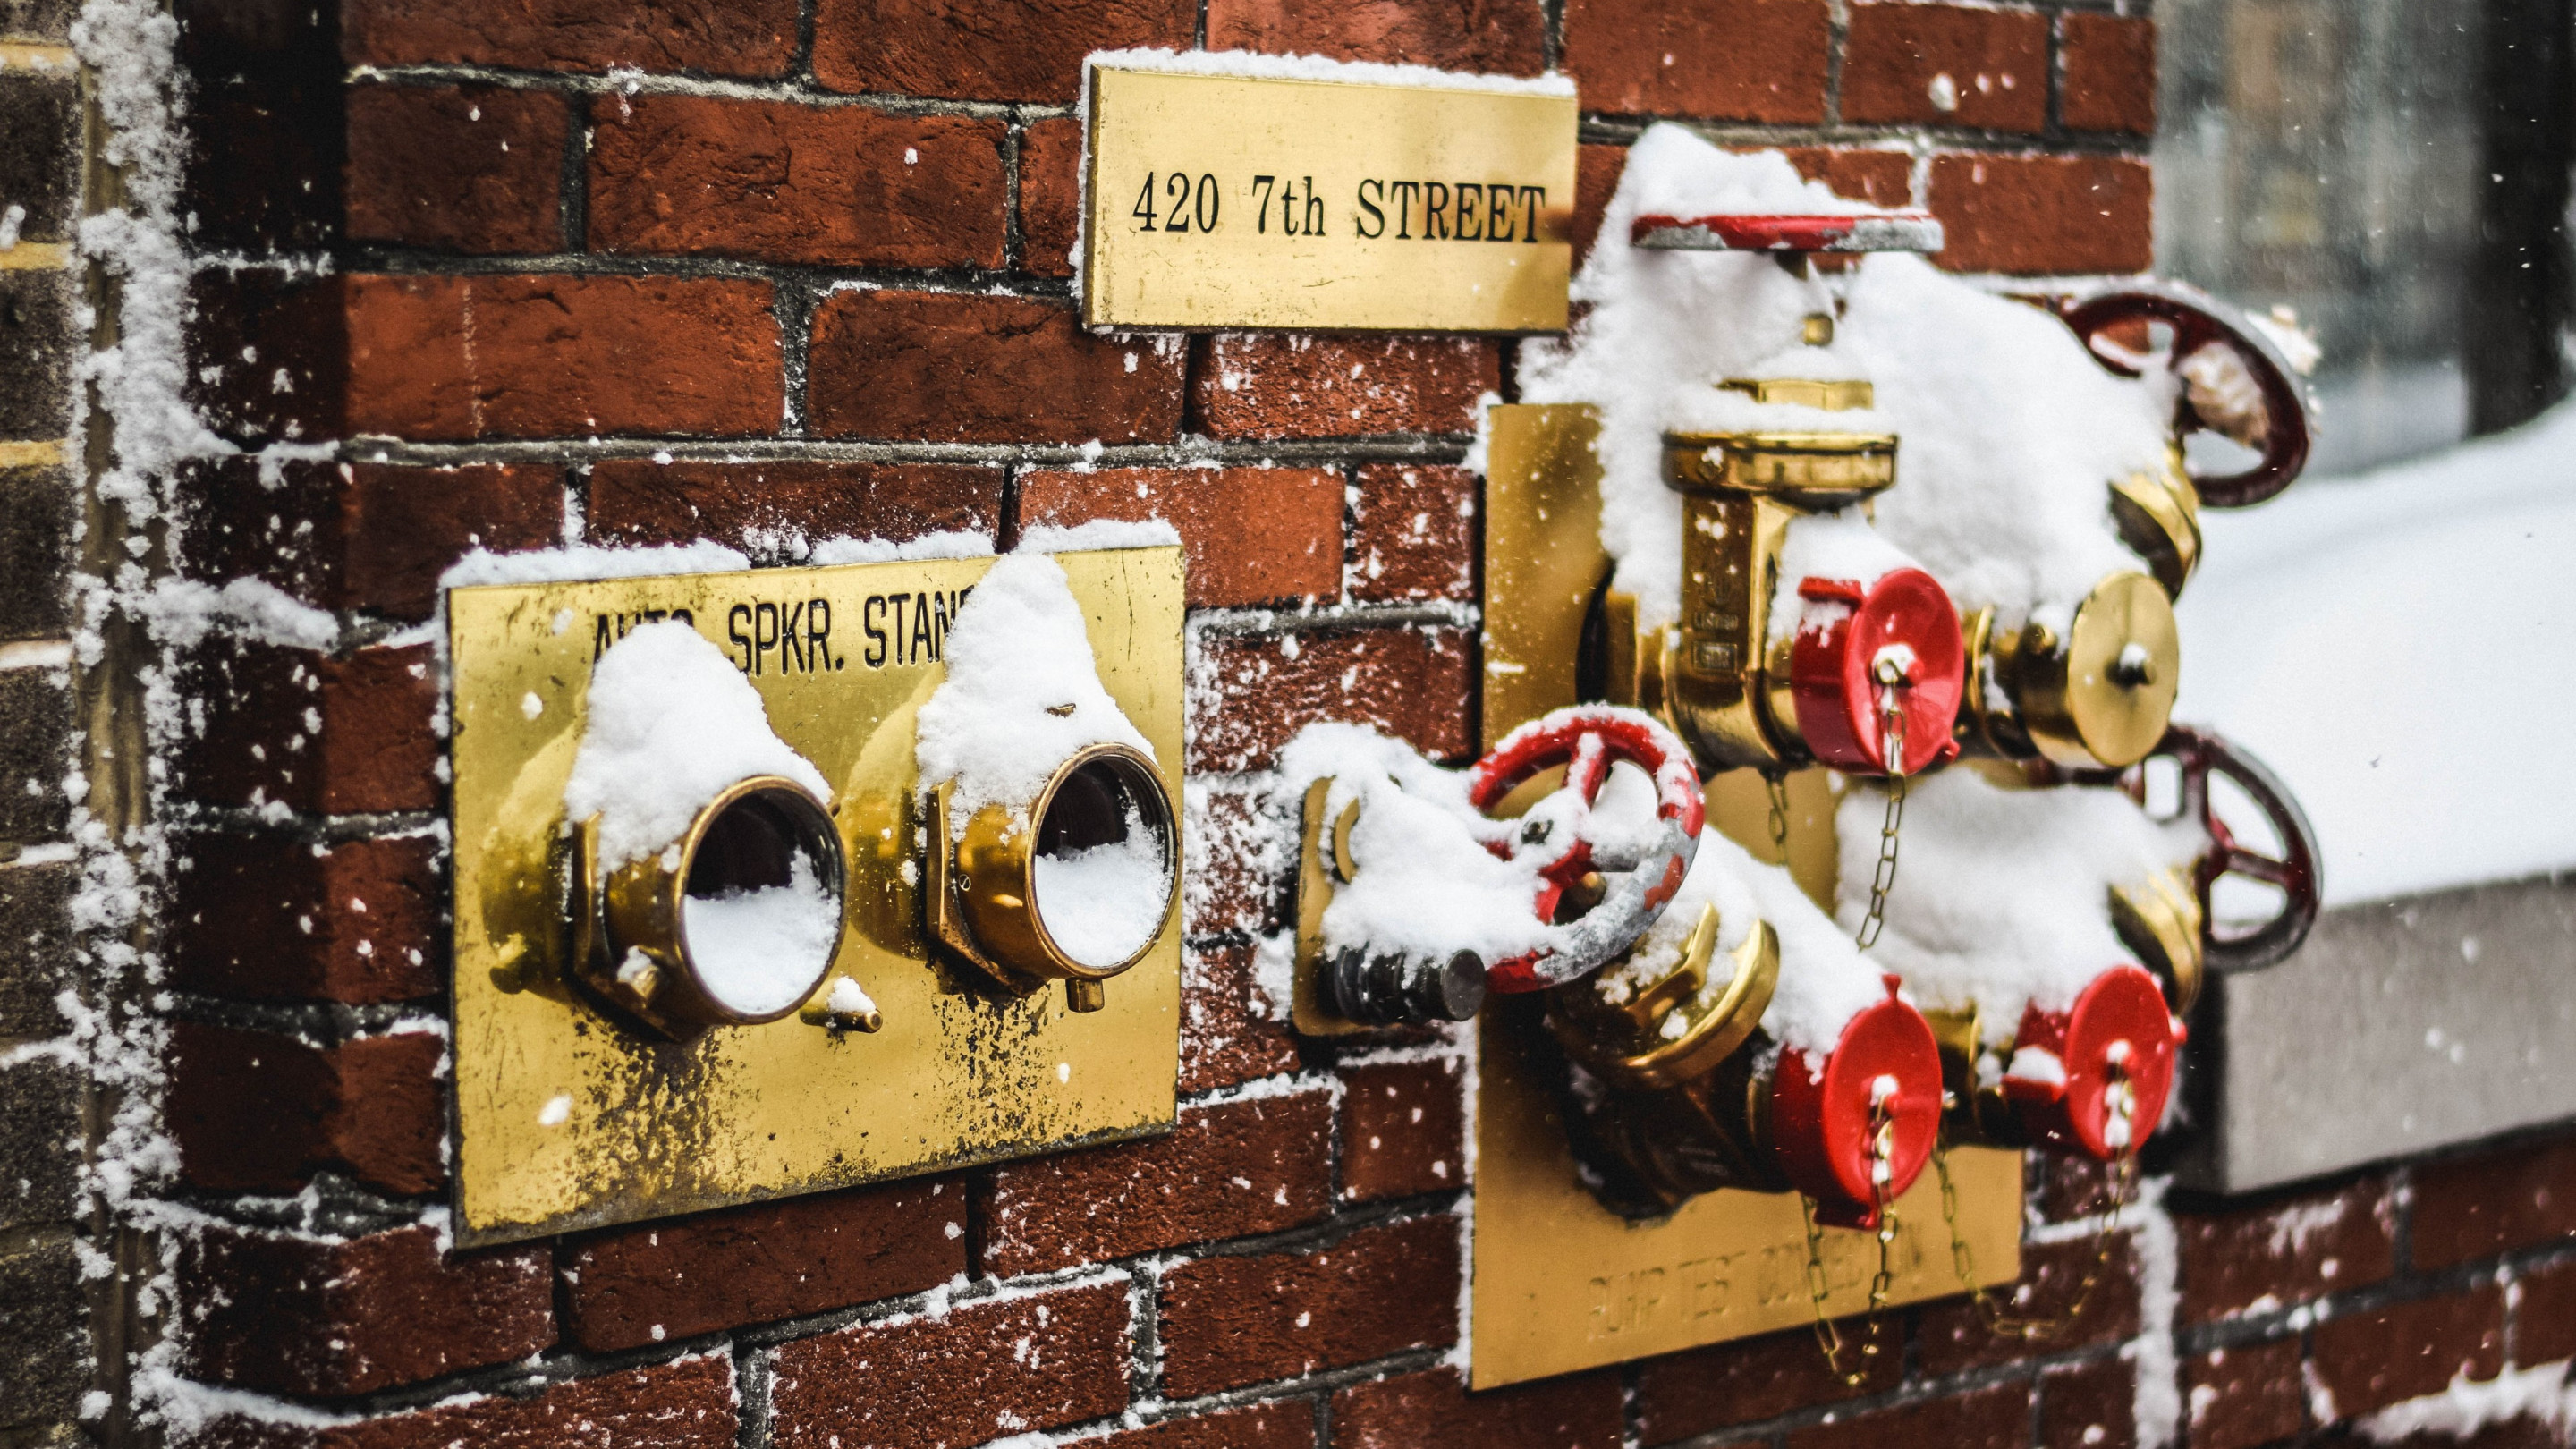 Snow covered fire standpipes in Washington wallpaper 2880x1620